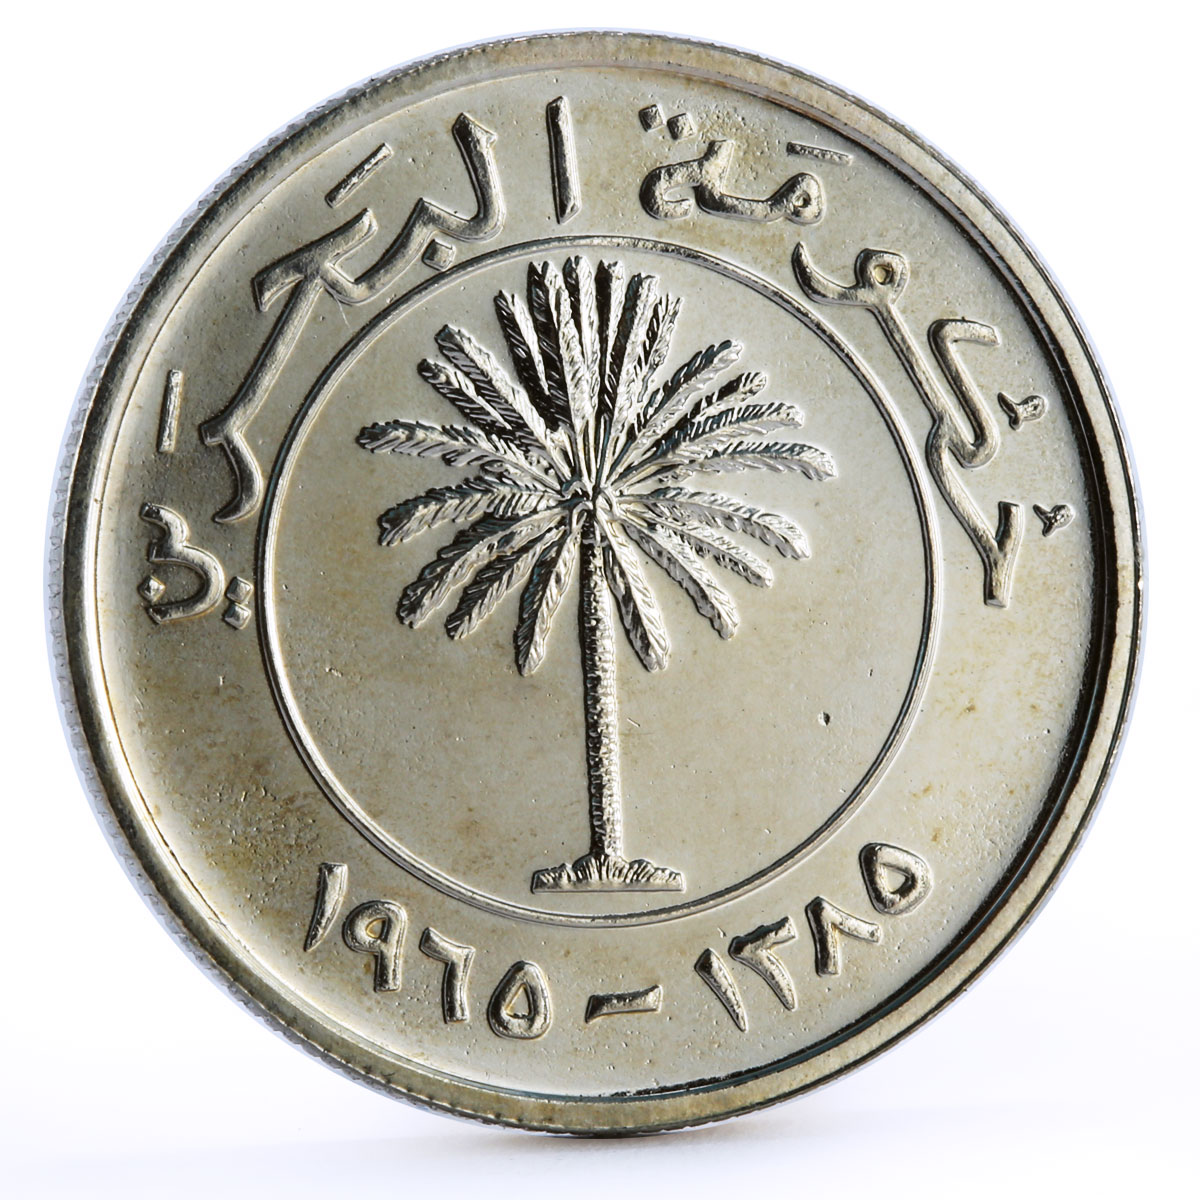 Bahrain 50 fils State Coinage Isa Palm Tree proof CuNi coin 1965